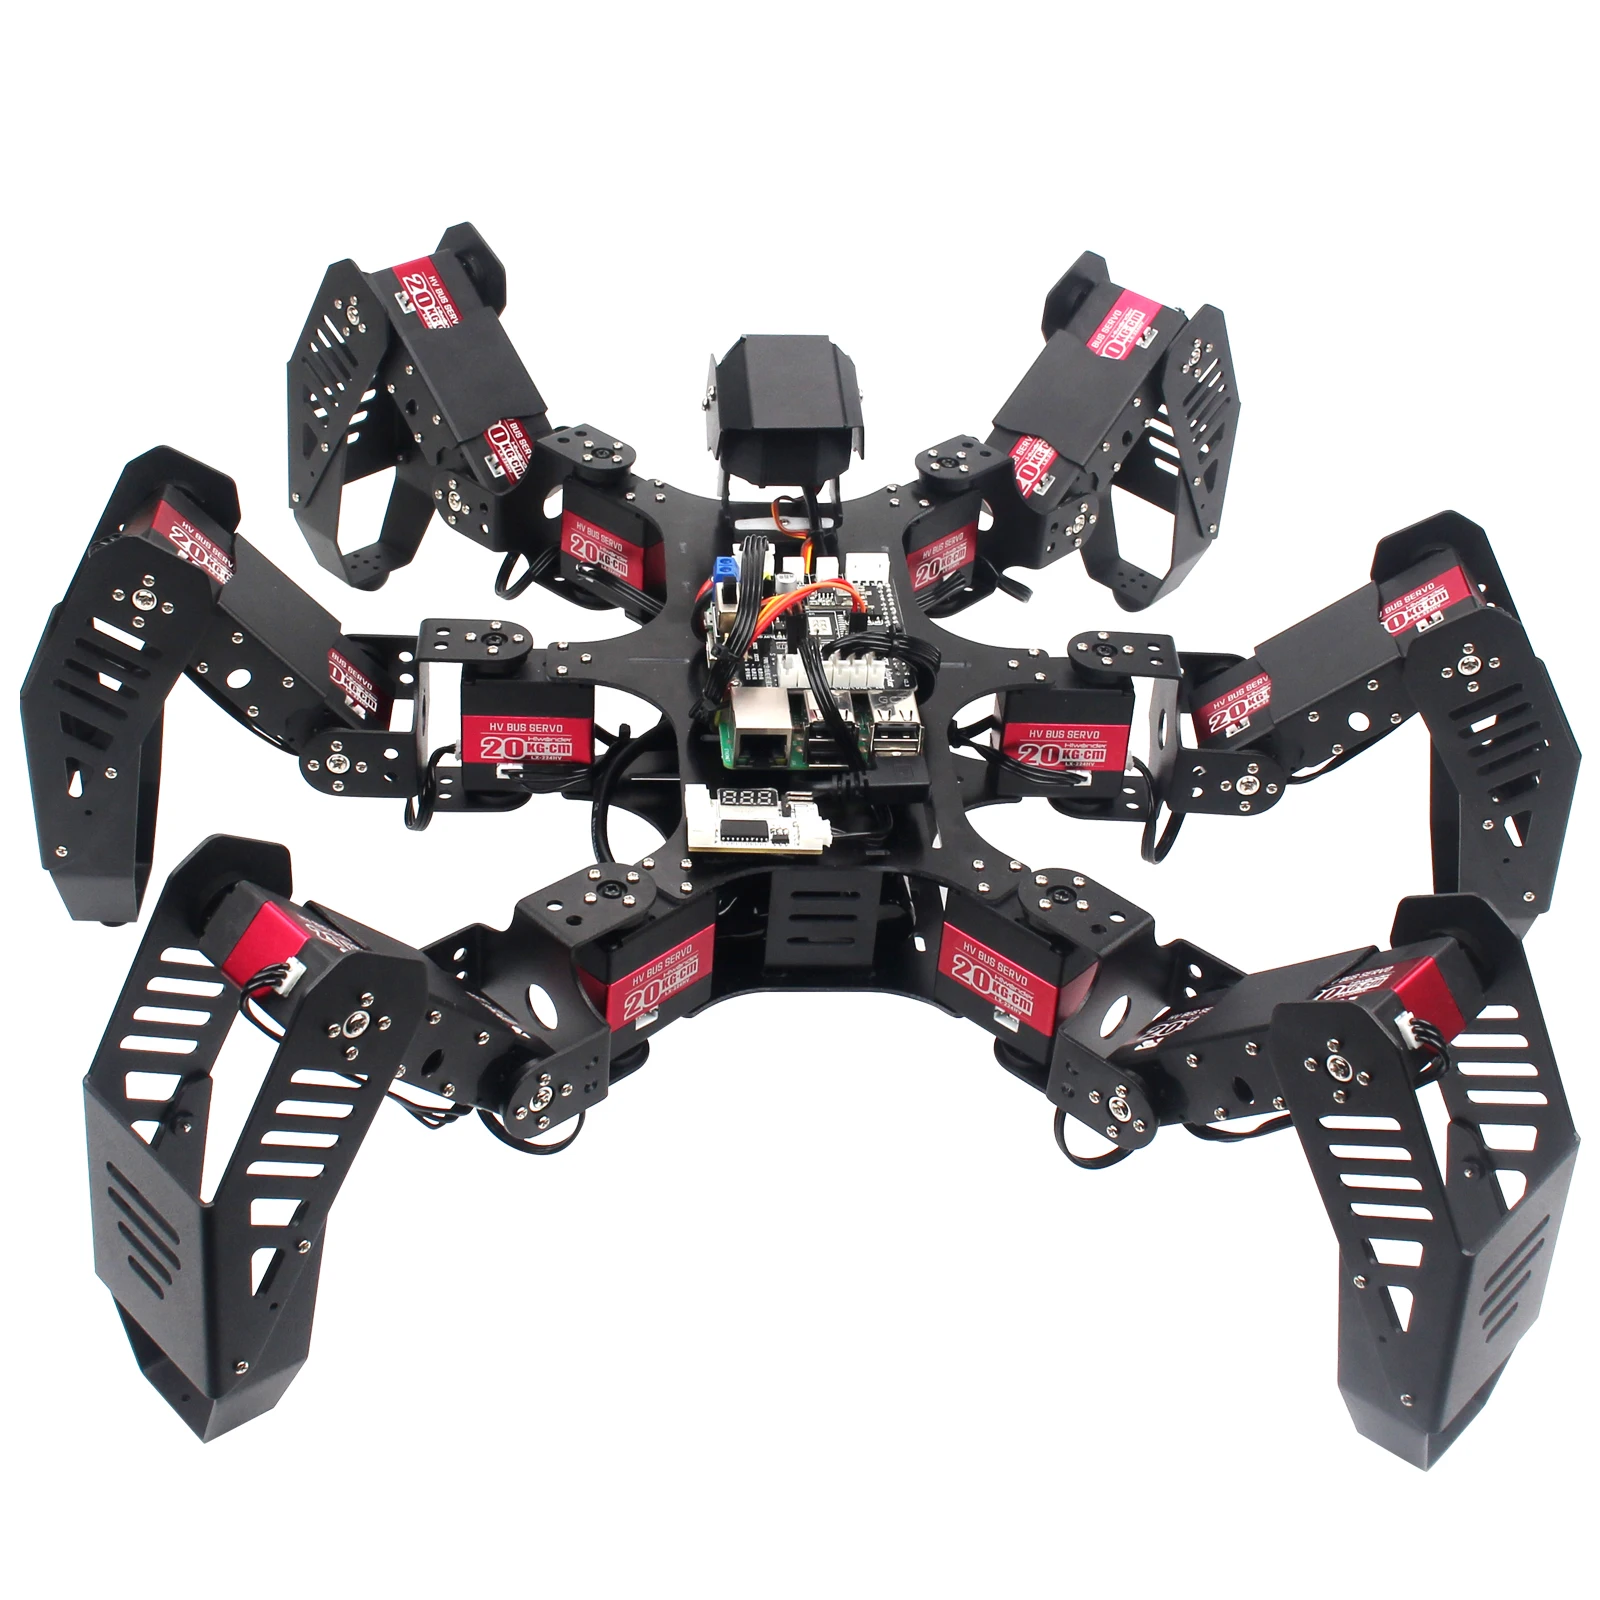 

18DOF Hexapod Robot 2DOF PTZ Spider Robot with Main Board for Raspberry Pi 4B/2G Finished